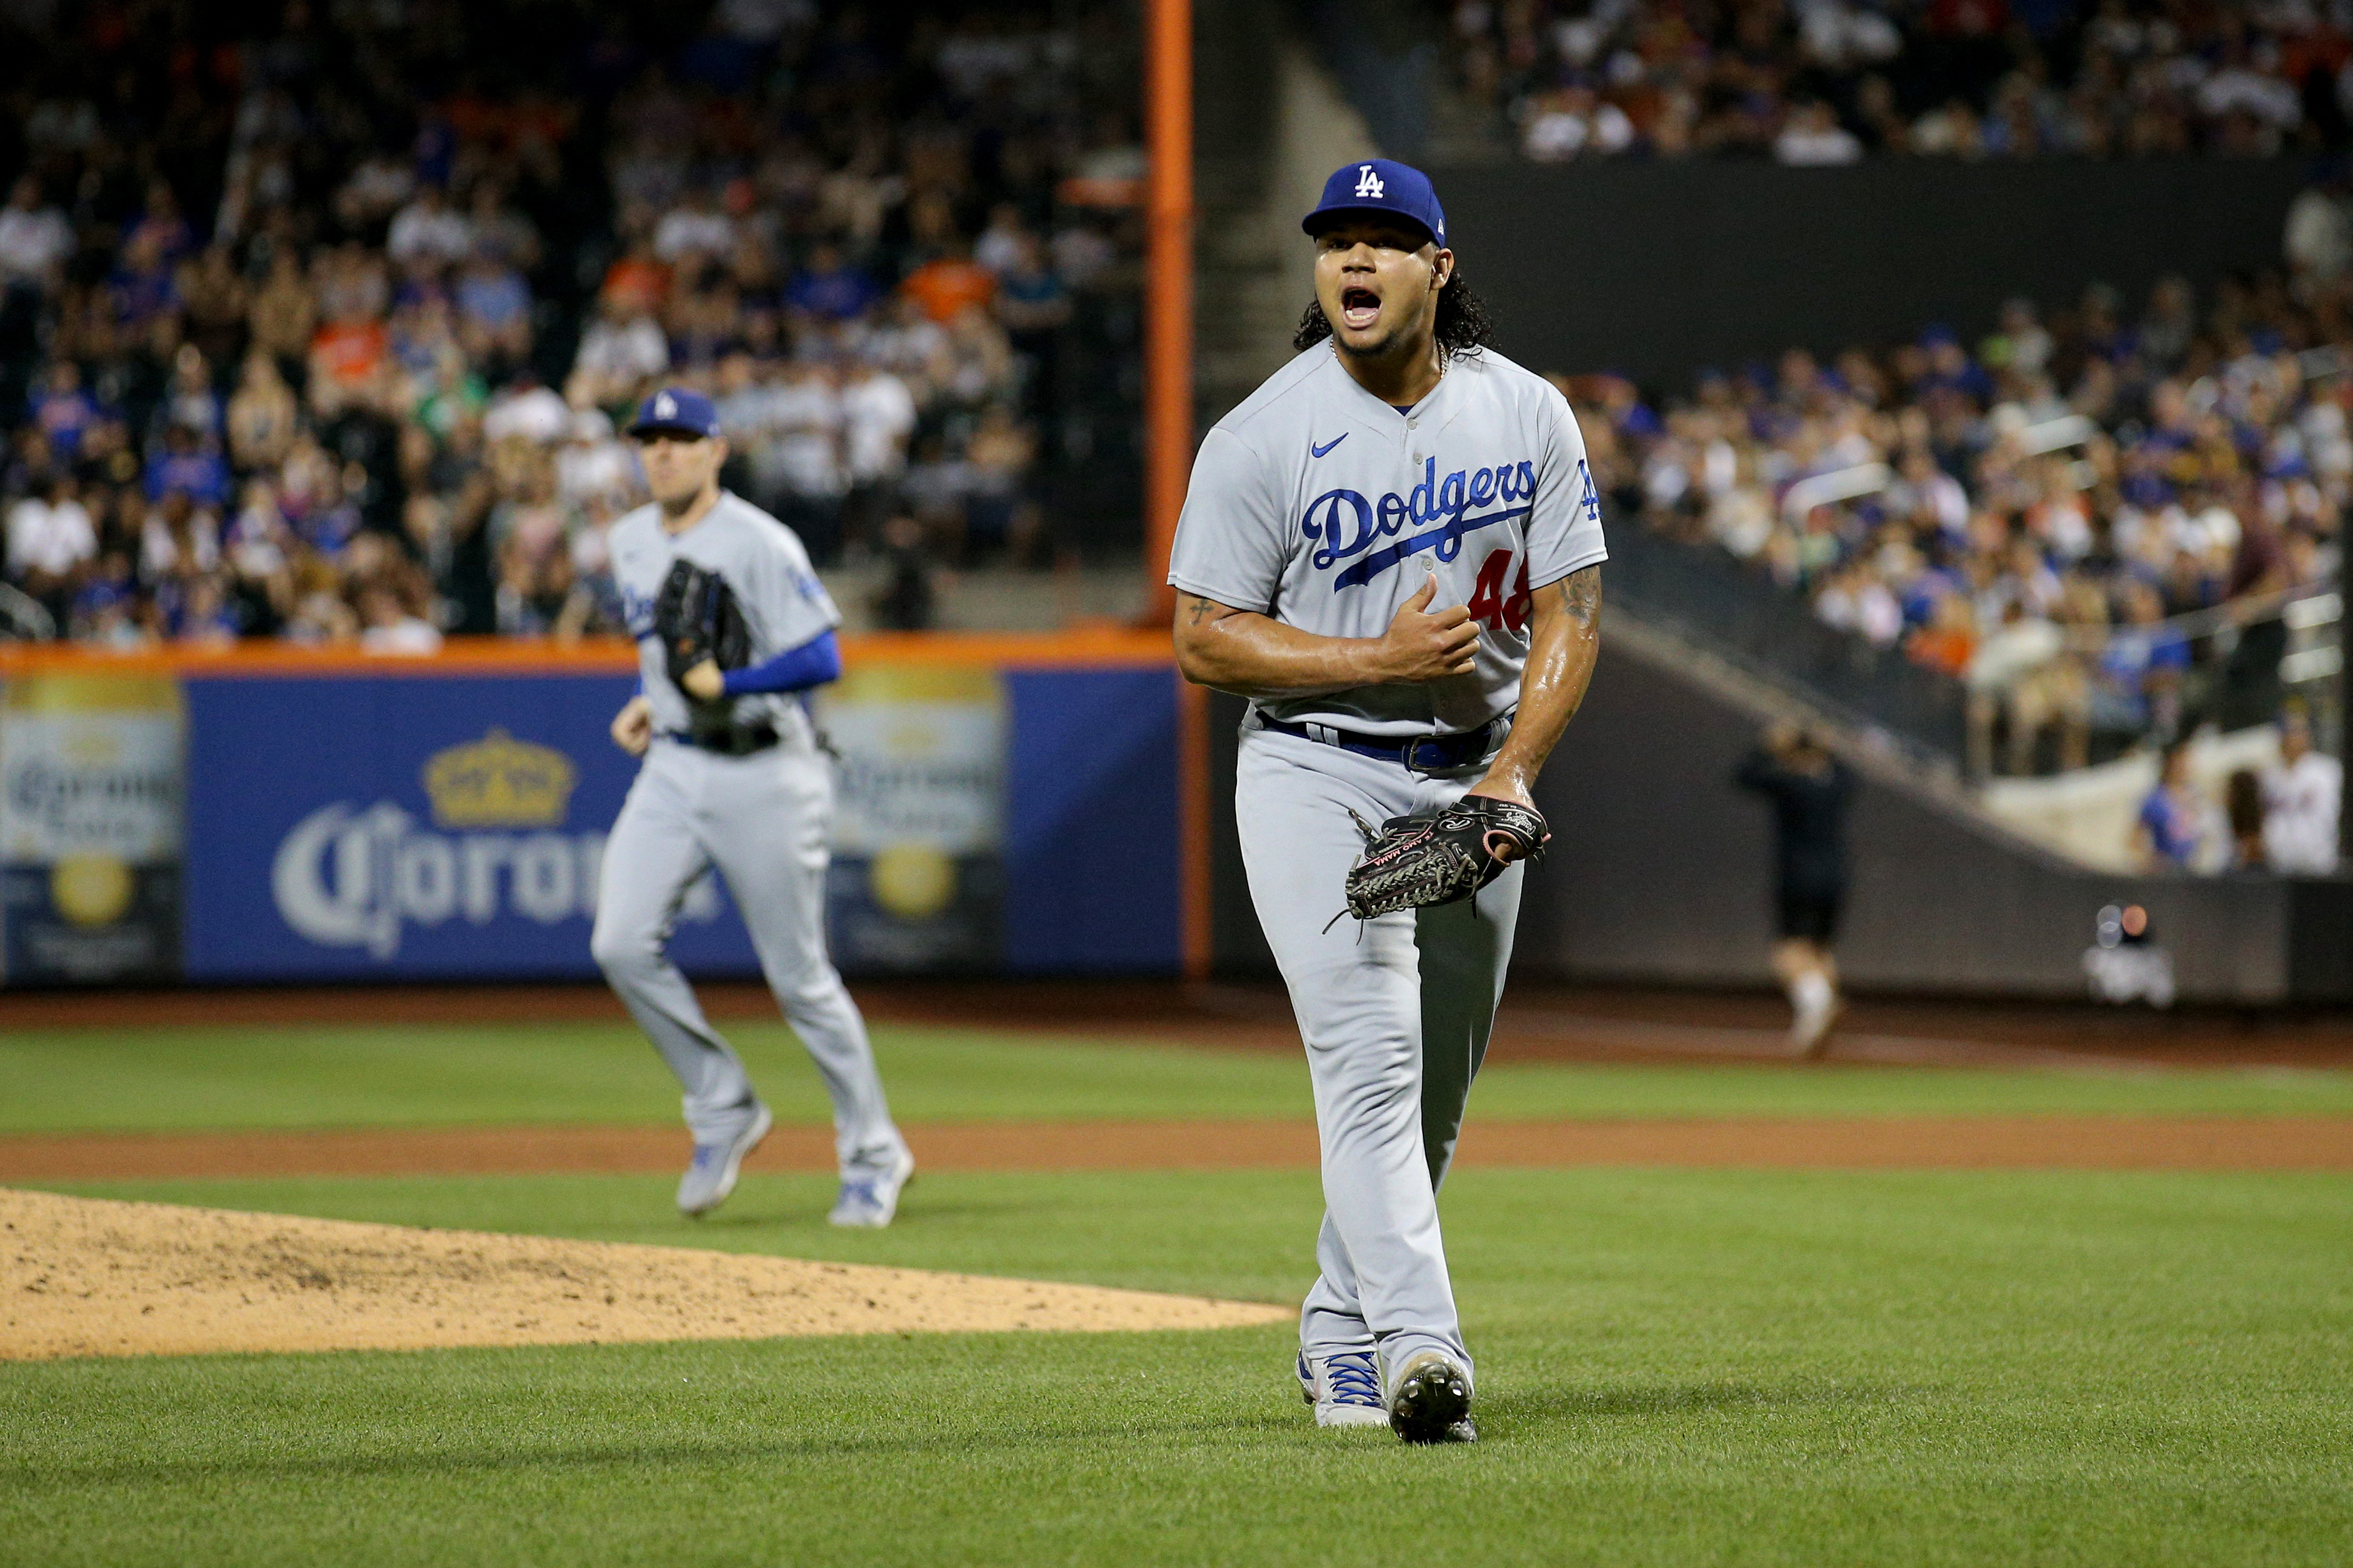 Dodgers extend win streak to 6 by beating Mets